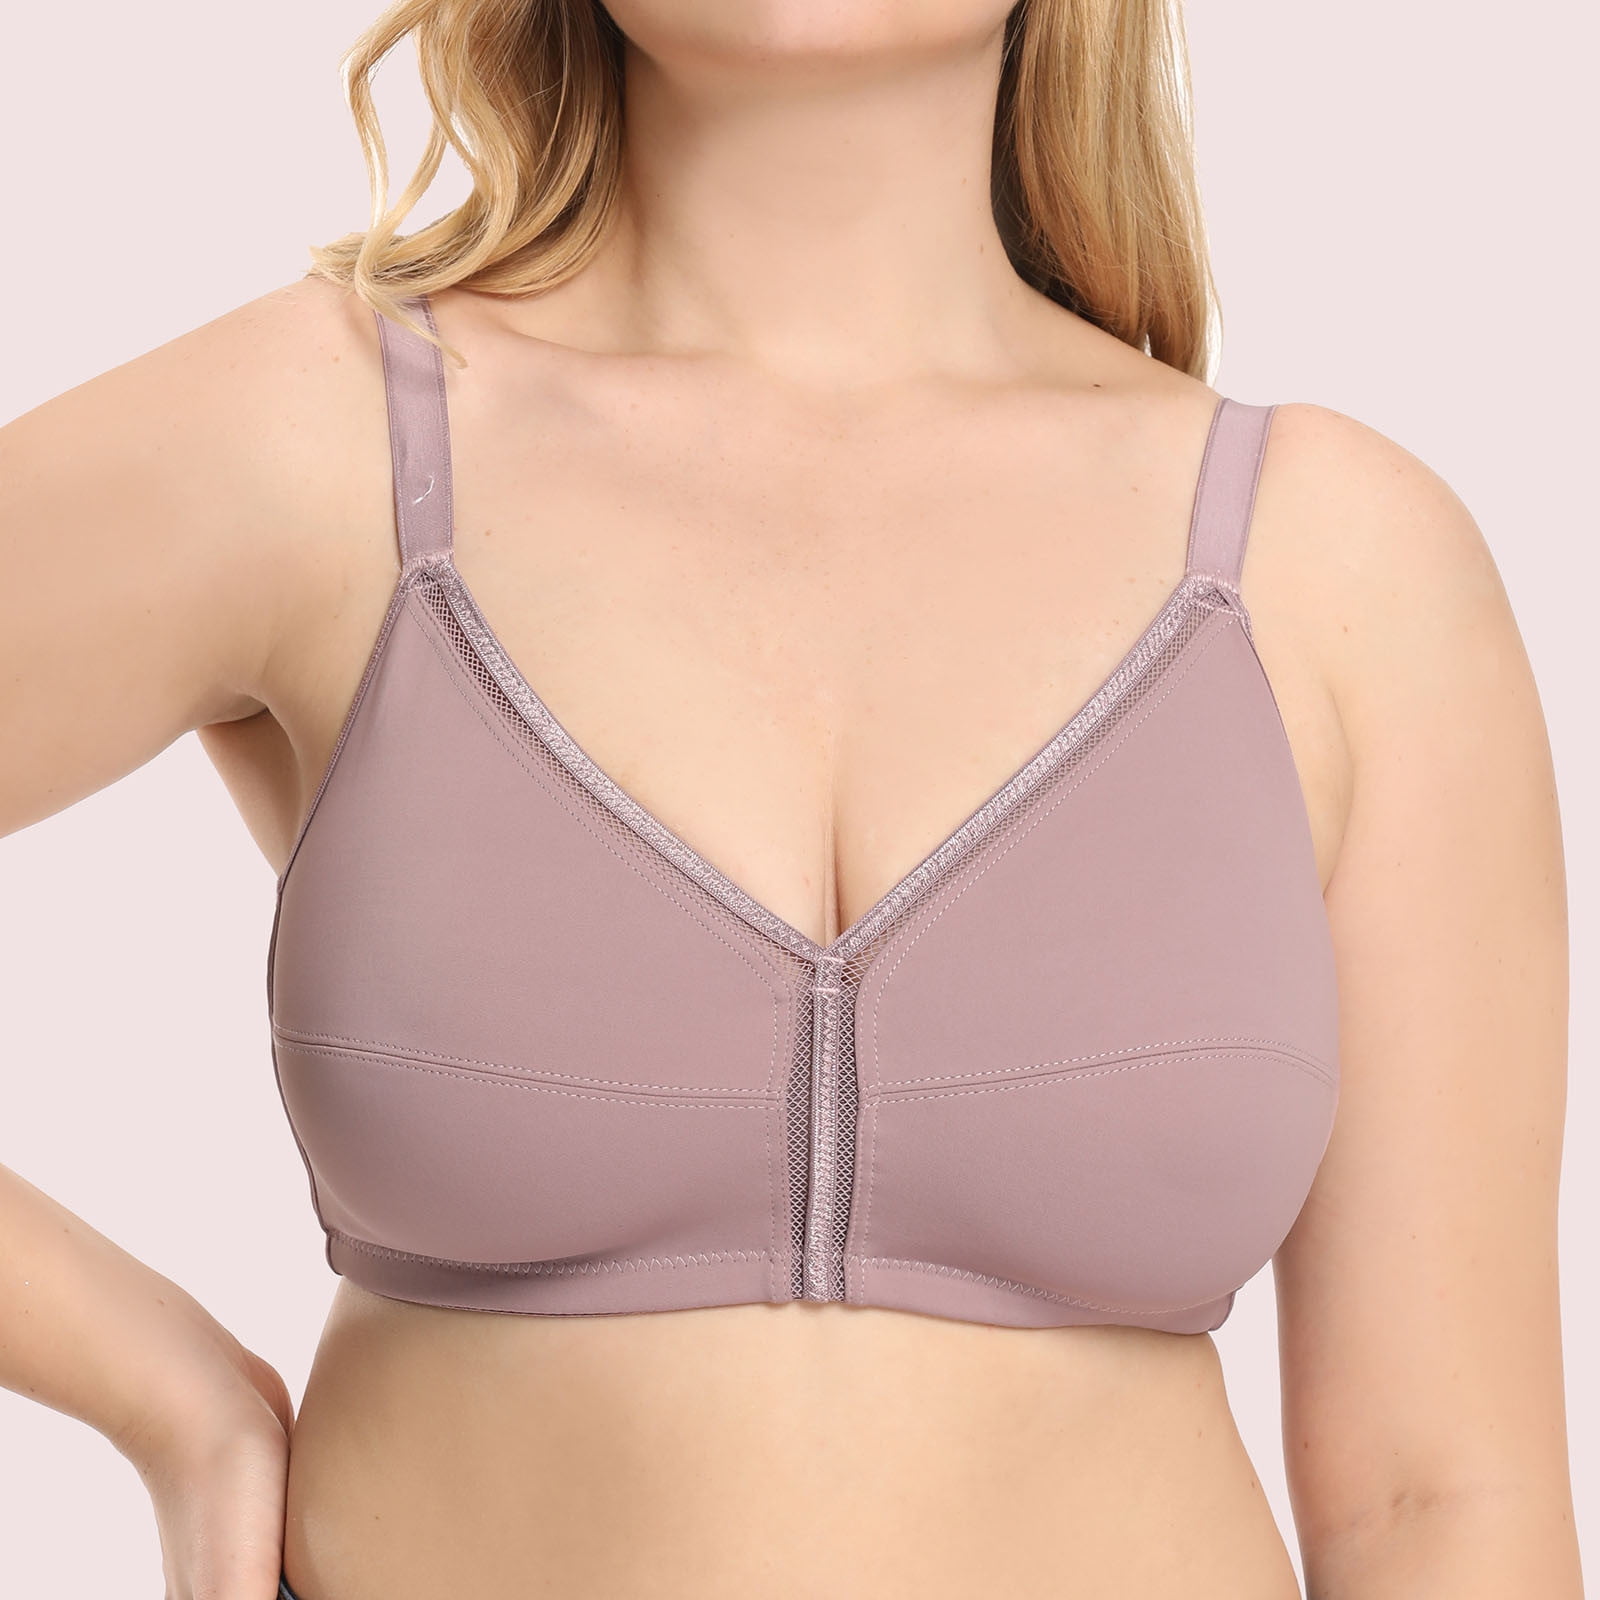 TIANEK Sports Bra for Women Casual T shirt Smooth Seamless Balconette  shapermint Plus Size Strap Breathable Push Up Unpadded Seamless Full  Underwear